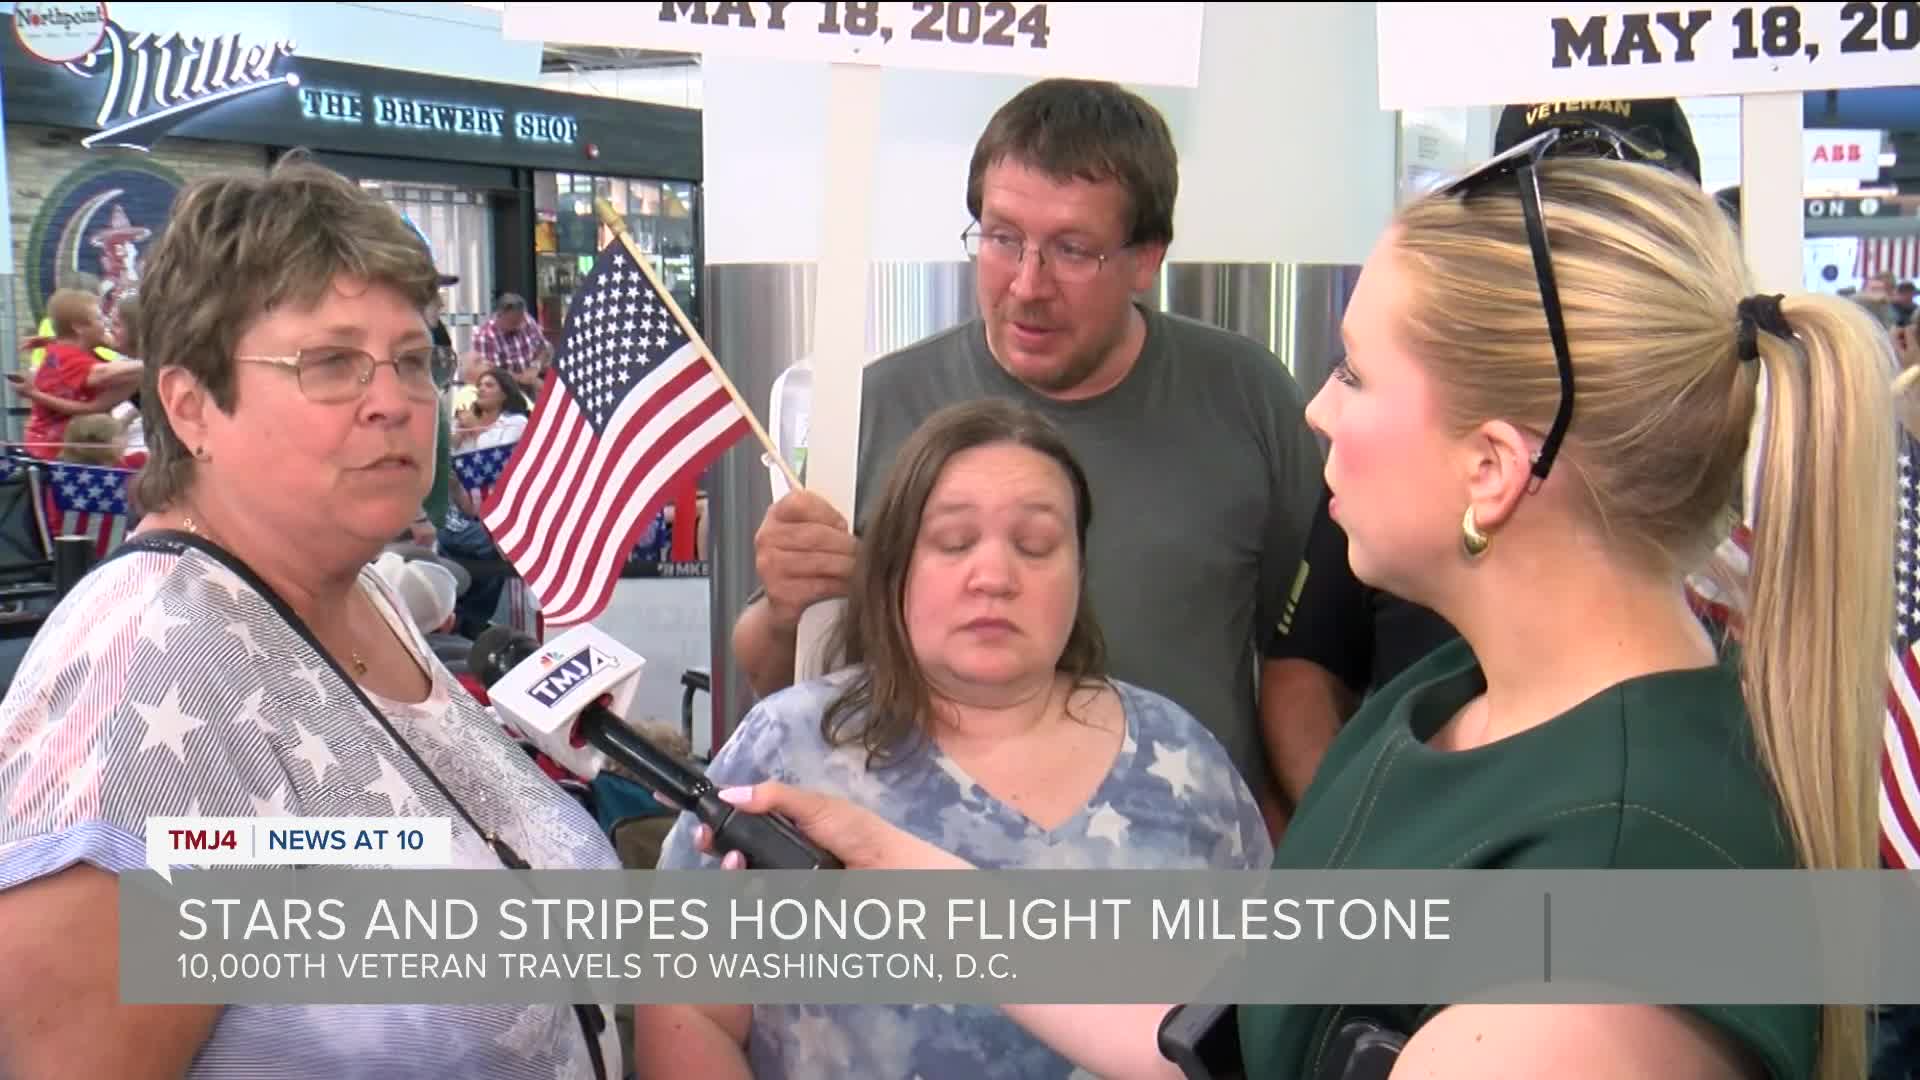 Milwaukee welcomes home 10,000th local veteran of Stars and Stripes Honor Flight